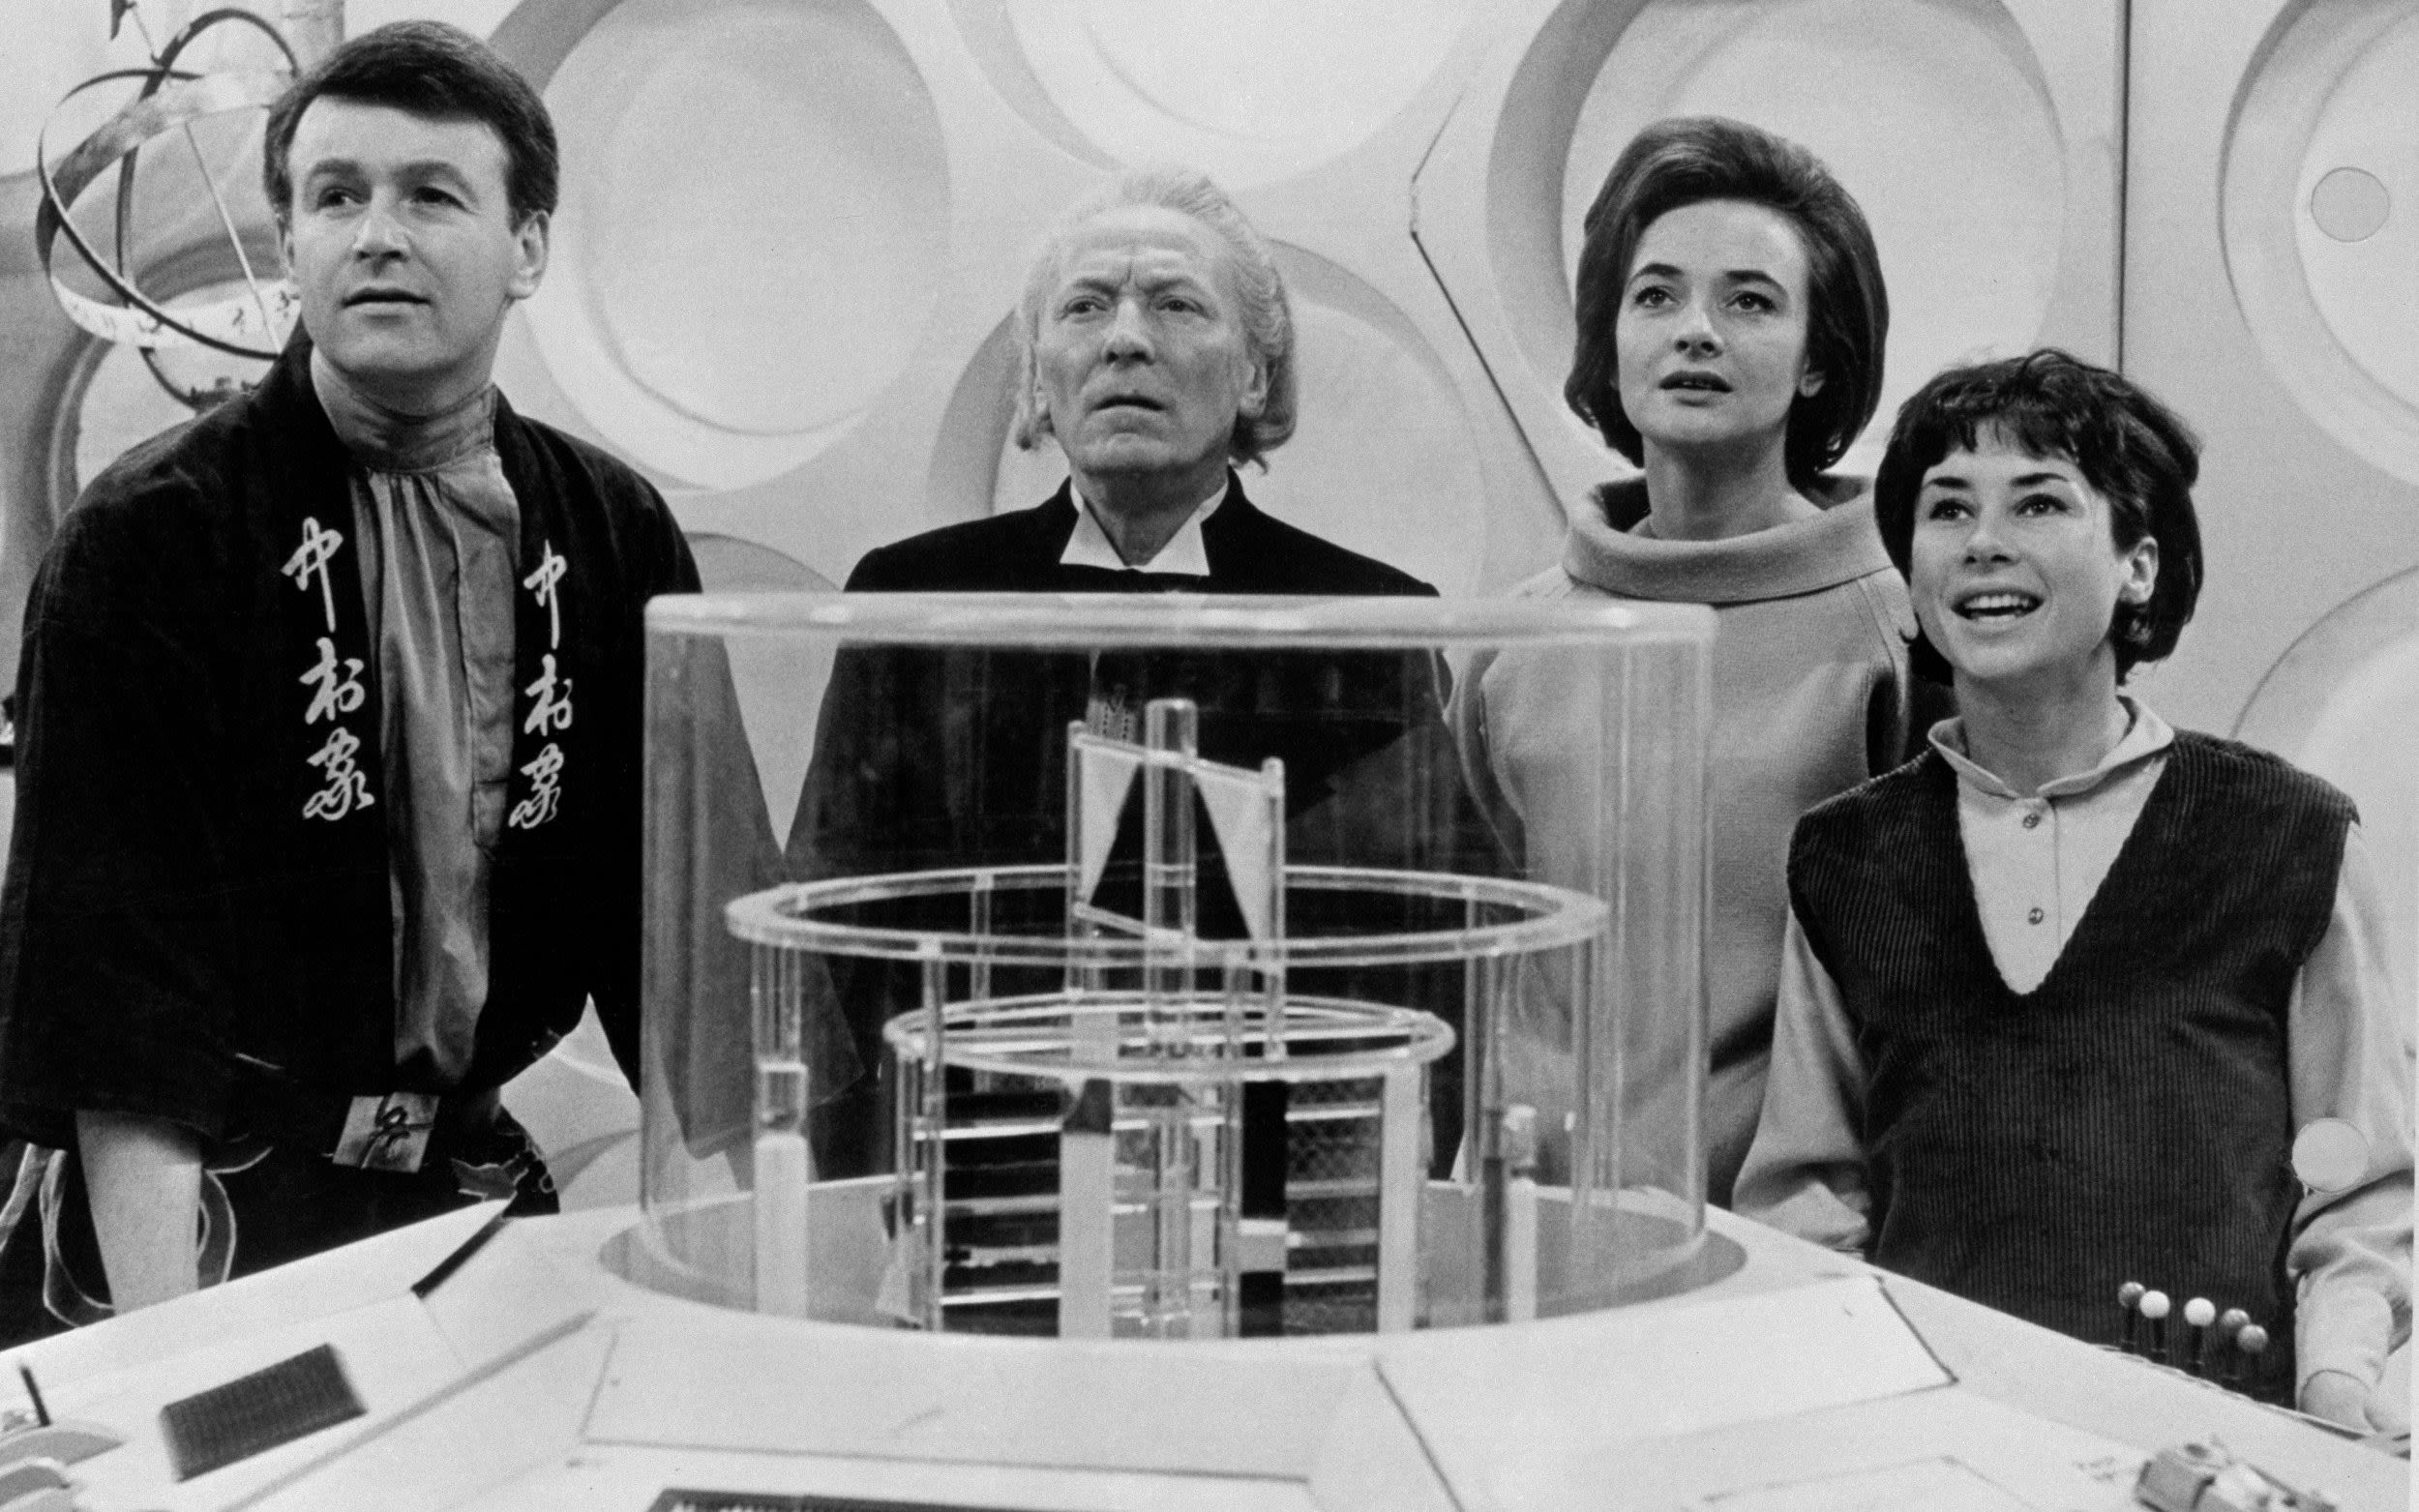 William Russell, actor remembered as Doctor Who’s original action hero and Sir Lancelot – obituary